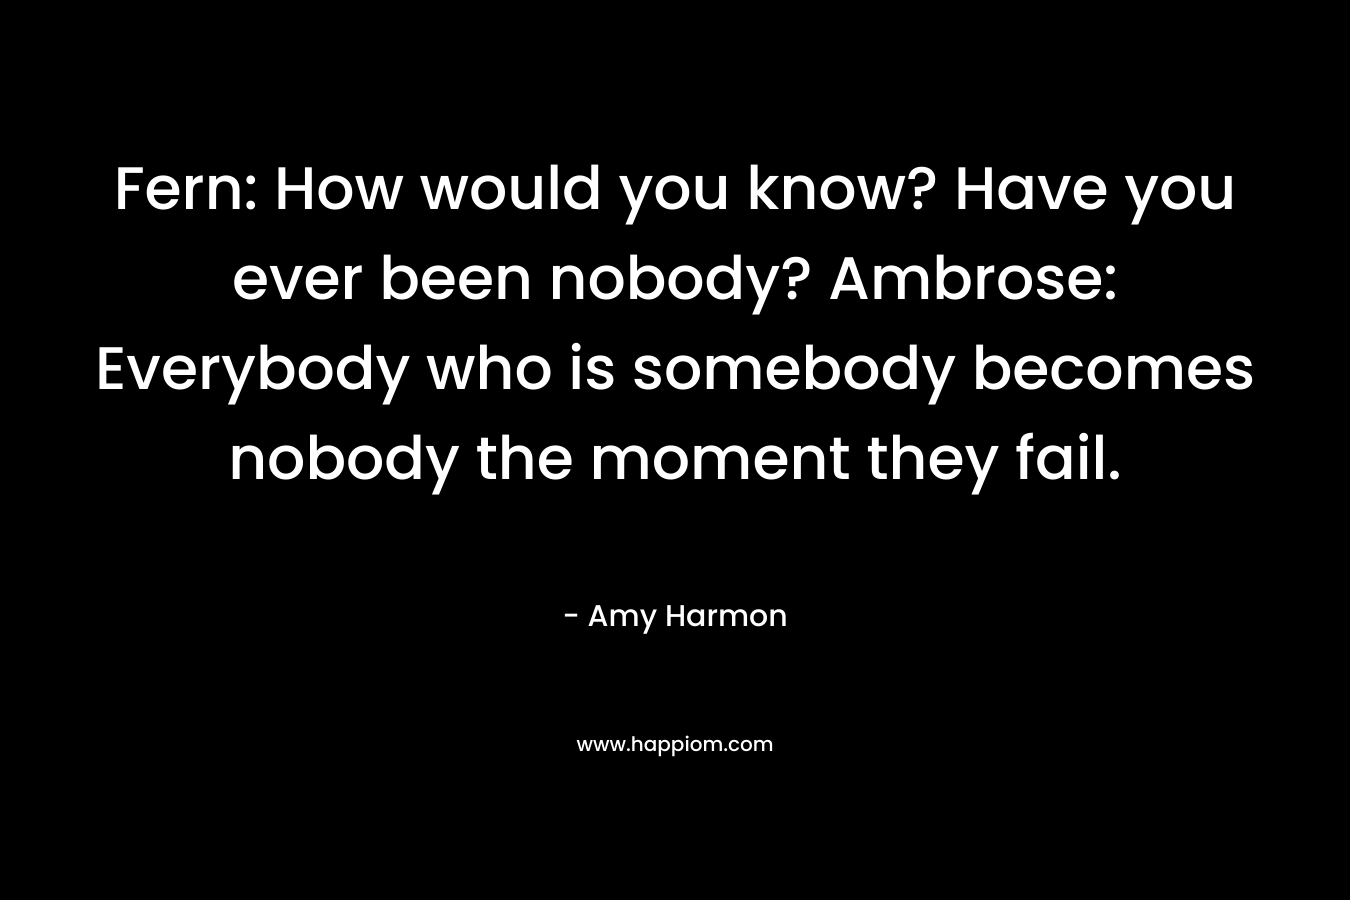 Fern: How would you know? Have you ever been nobody? Ambrose: Everybody who is somebody becomes nobody the moment they fail.